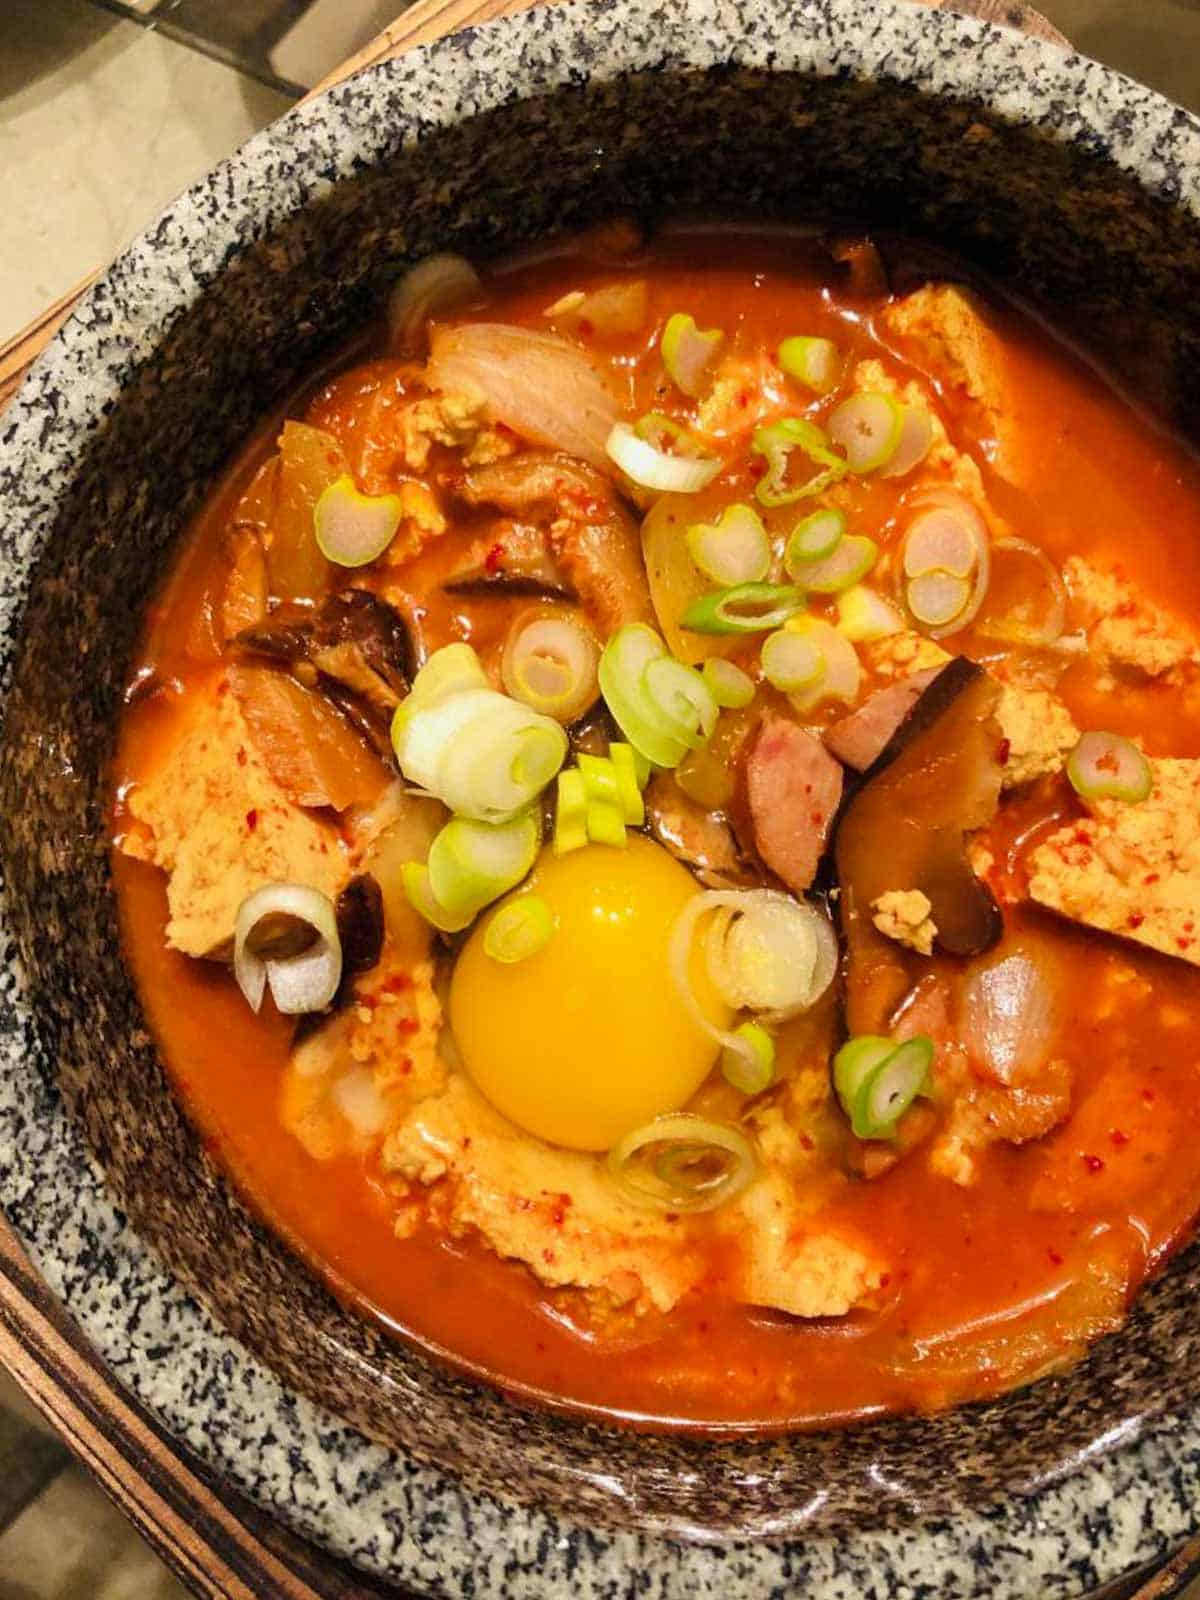 Korean Soft Tofu Stew in a clay pot with an egg yolk and green onions as garnish